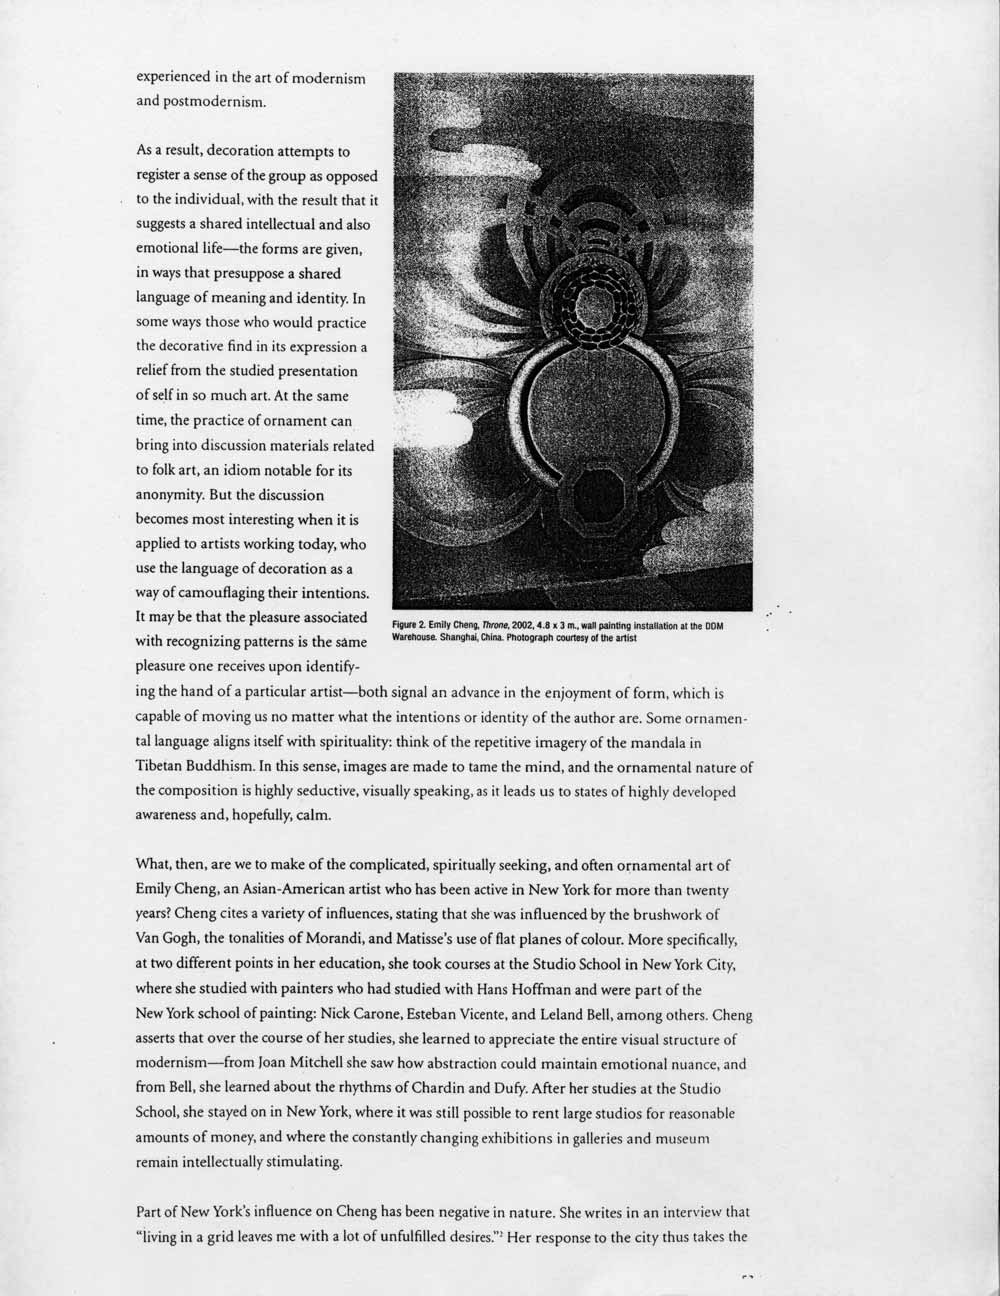 Ornament as Knowledge, pg 2